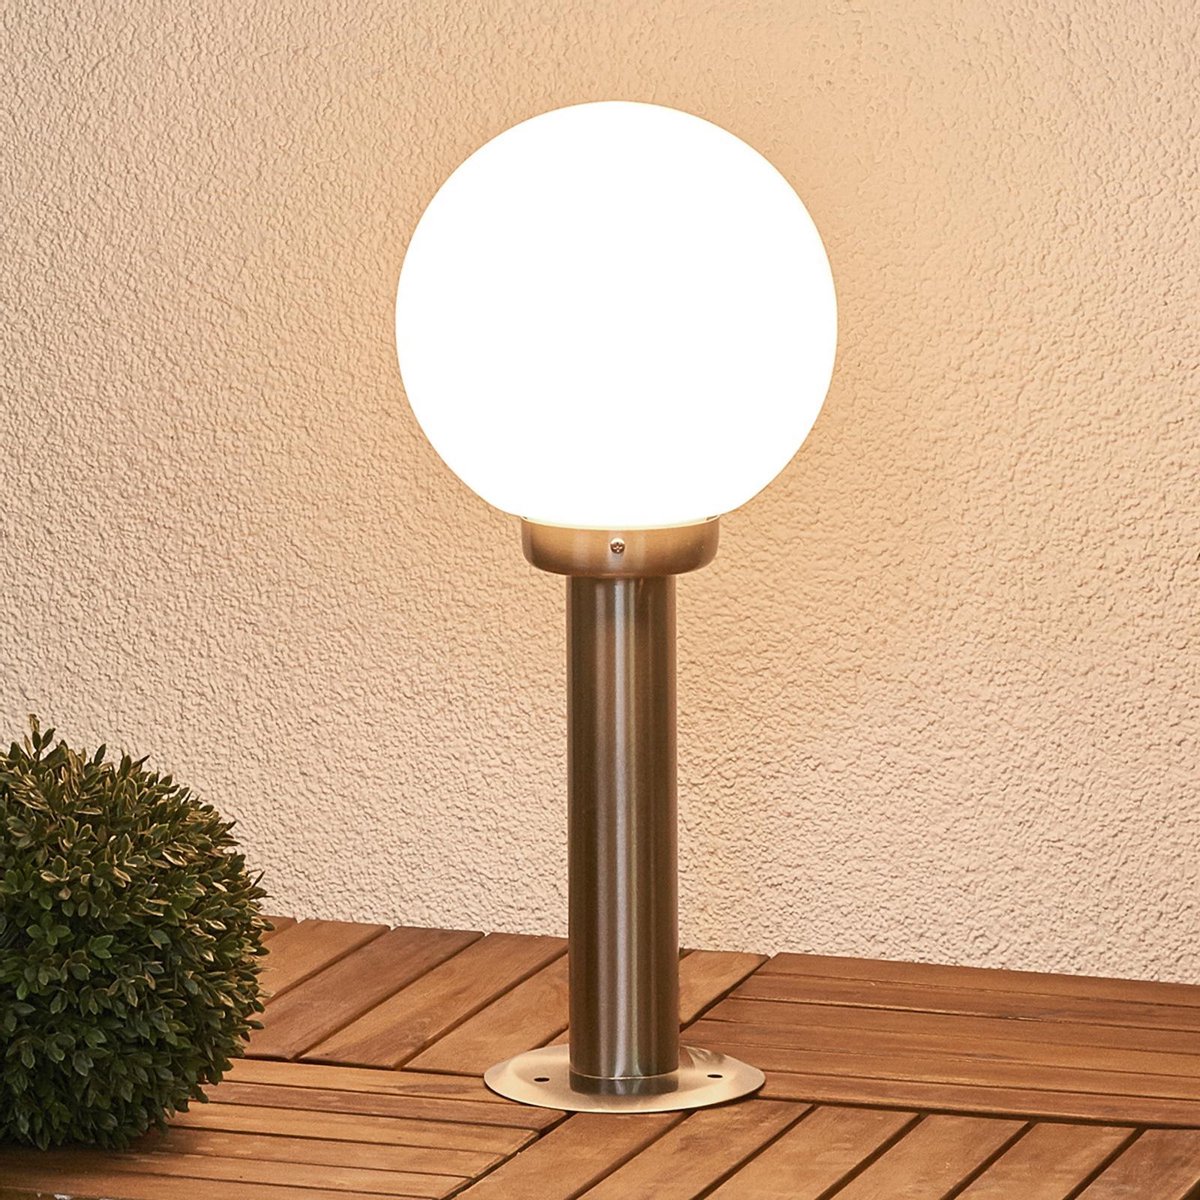 Lindby buitenlamp 1licht roestvrij staal glas H: 45 cm E27 roestvrij staal opaalwit